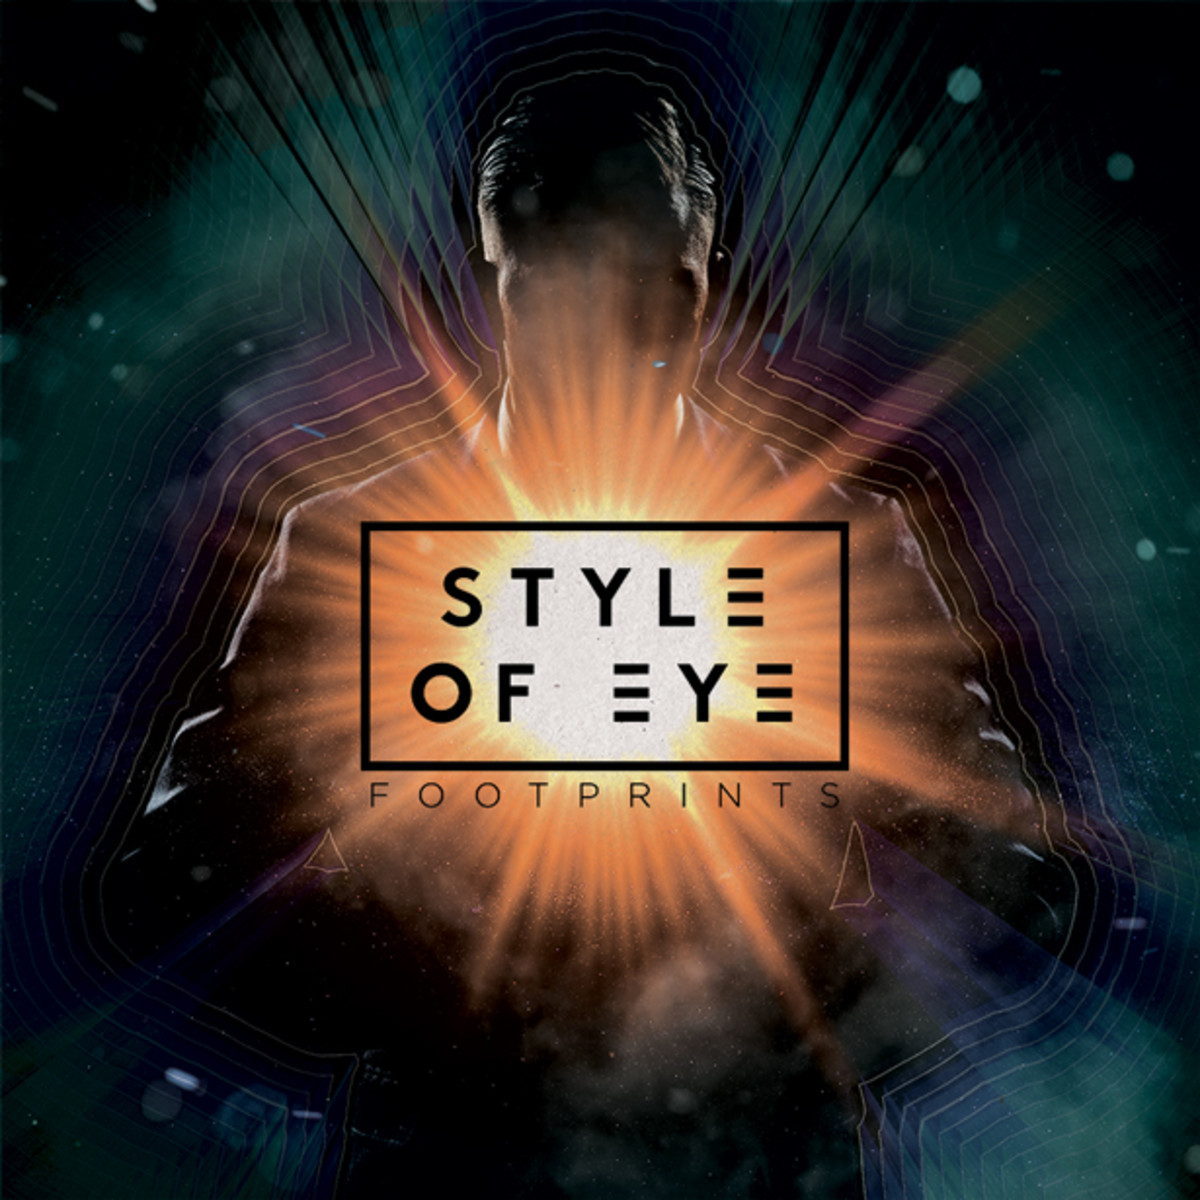 Exclusive: Style Of Eye 'Footprints' - Complete Album Track List Revealed